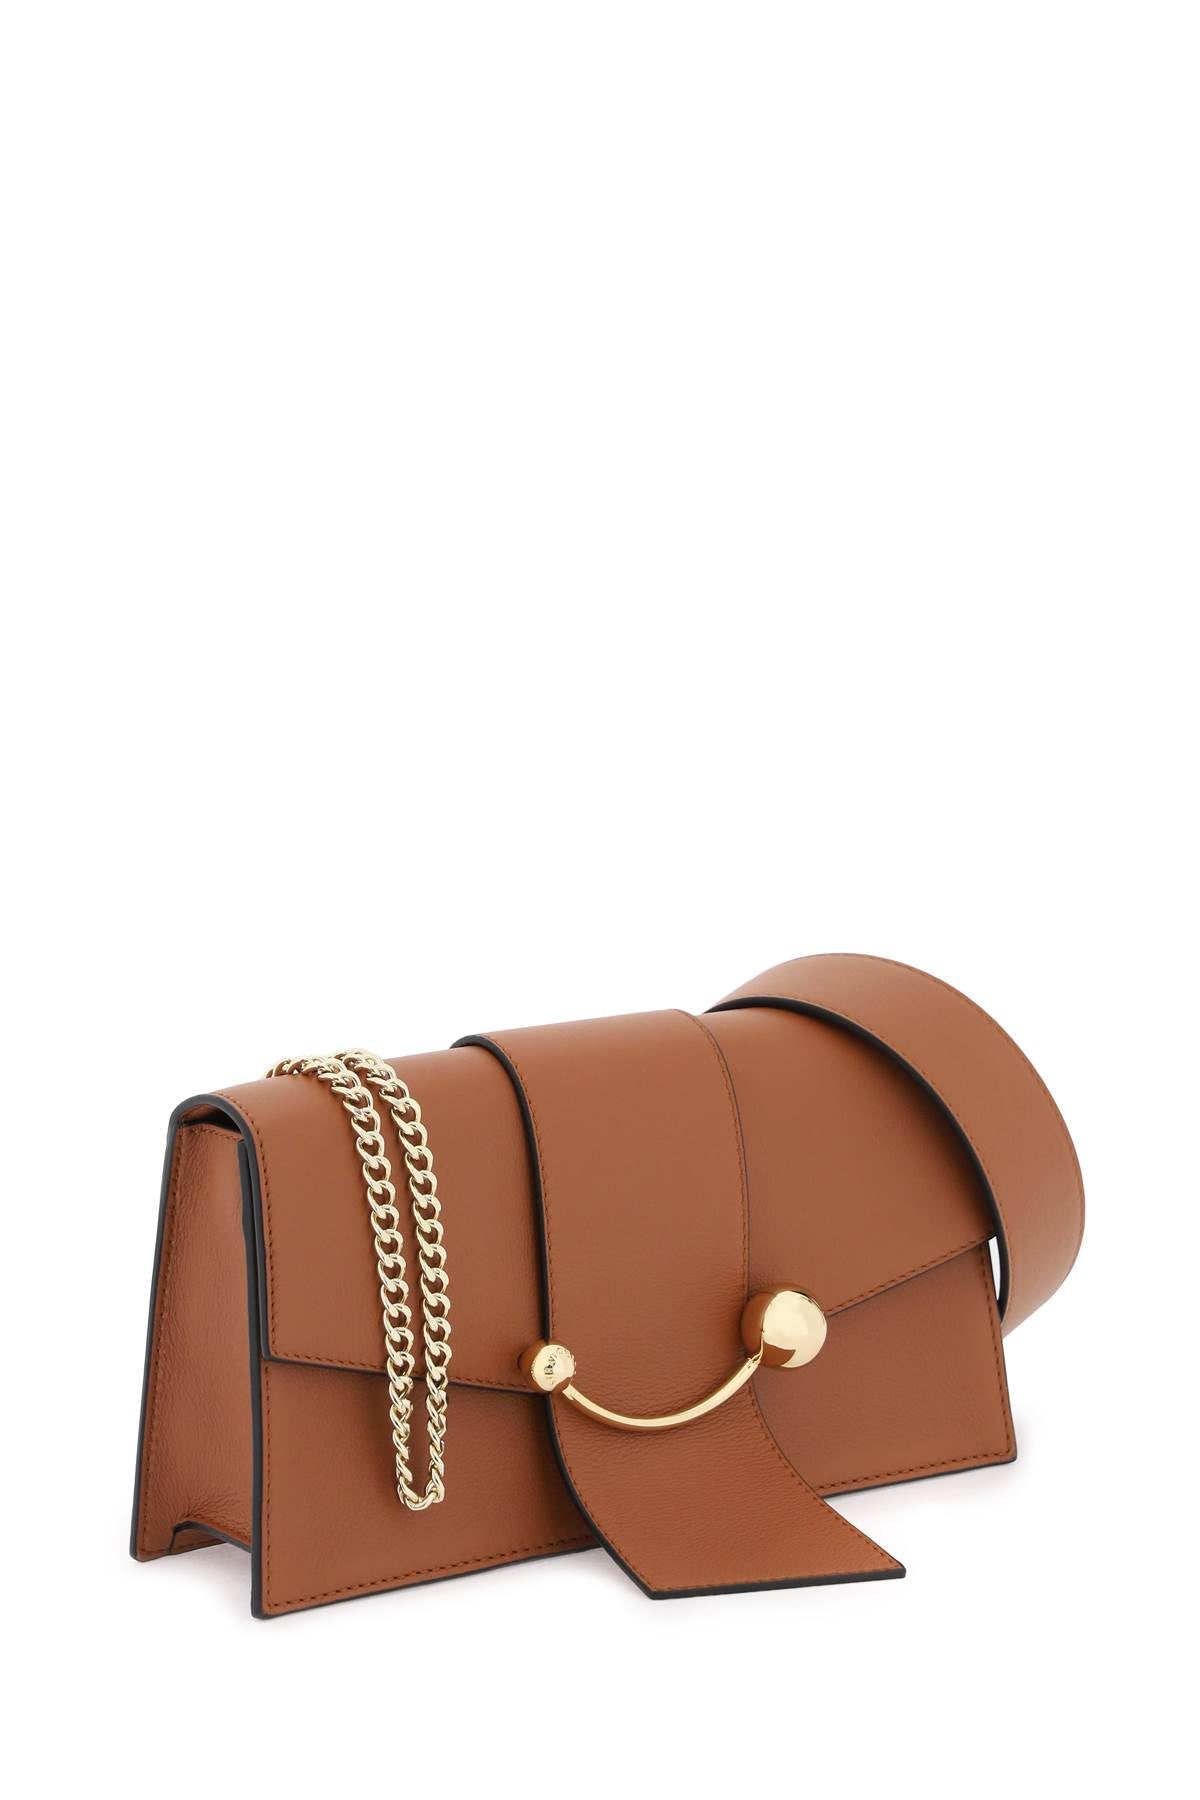 STRATHBERRY Mini Crescent Leather Crossbody & Shoulder Bag in Brown